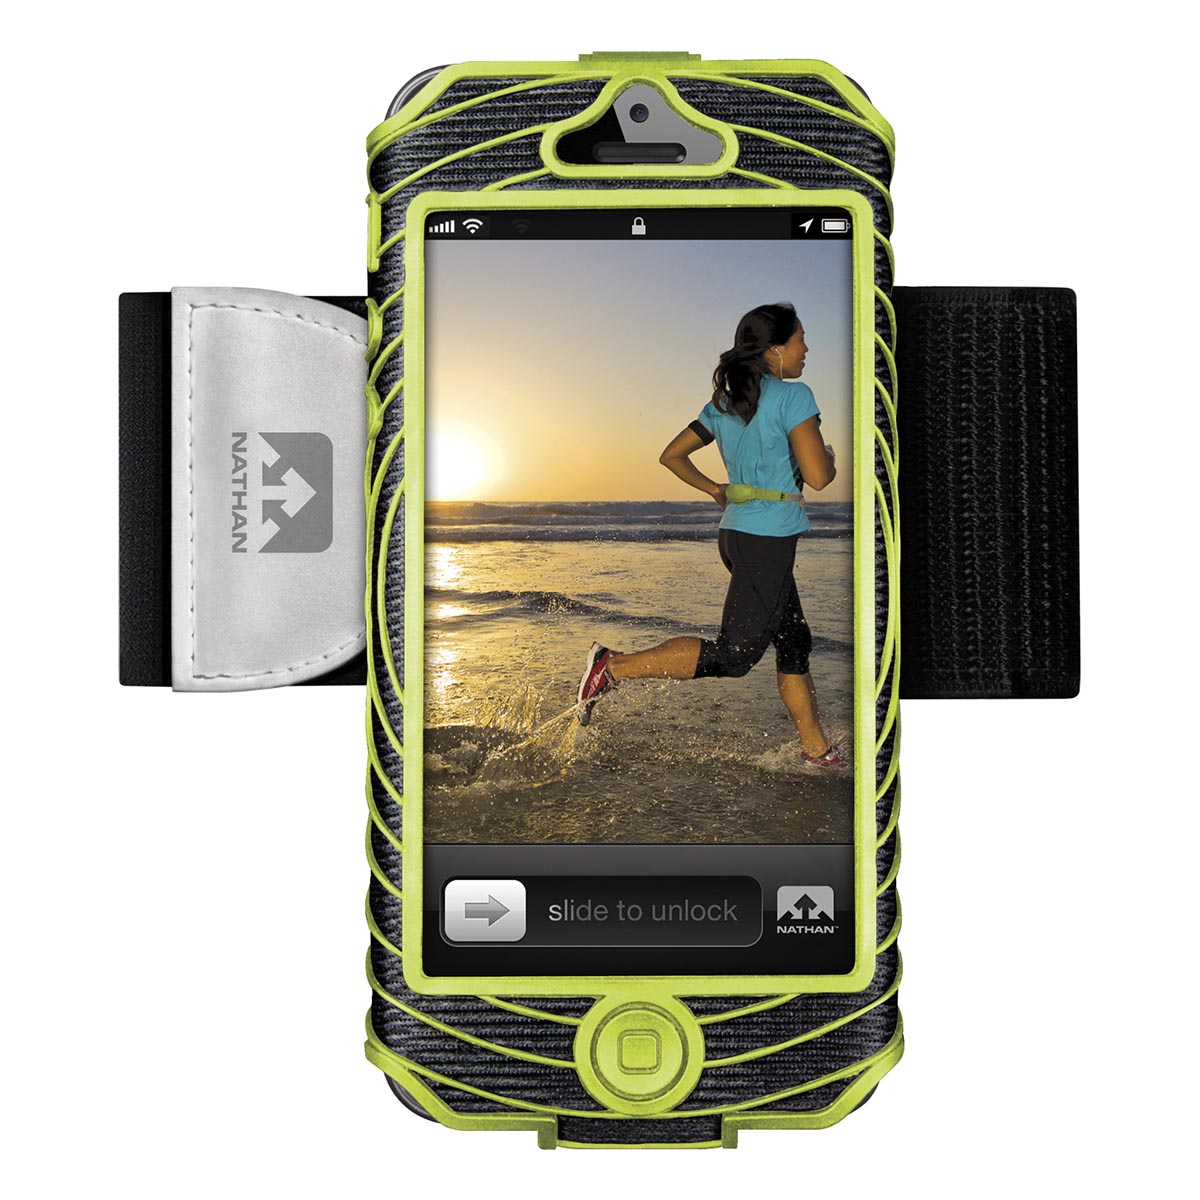 Nathan Sonic Boom Armband for iPhone 5, , large image number null